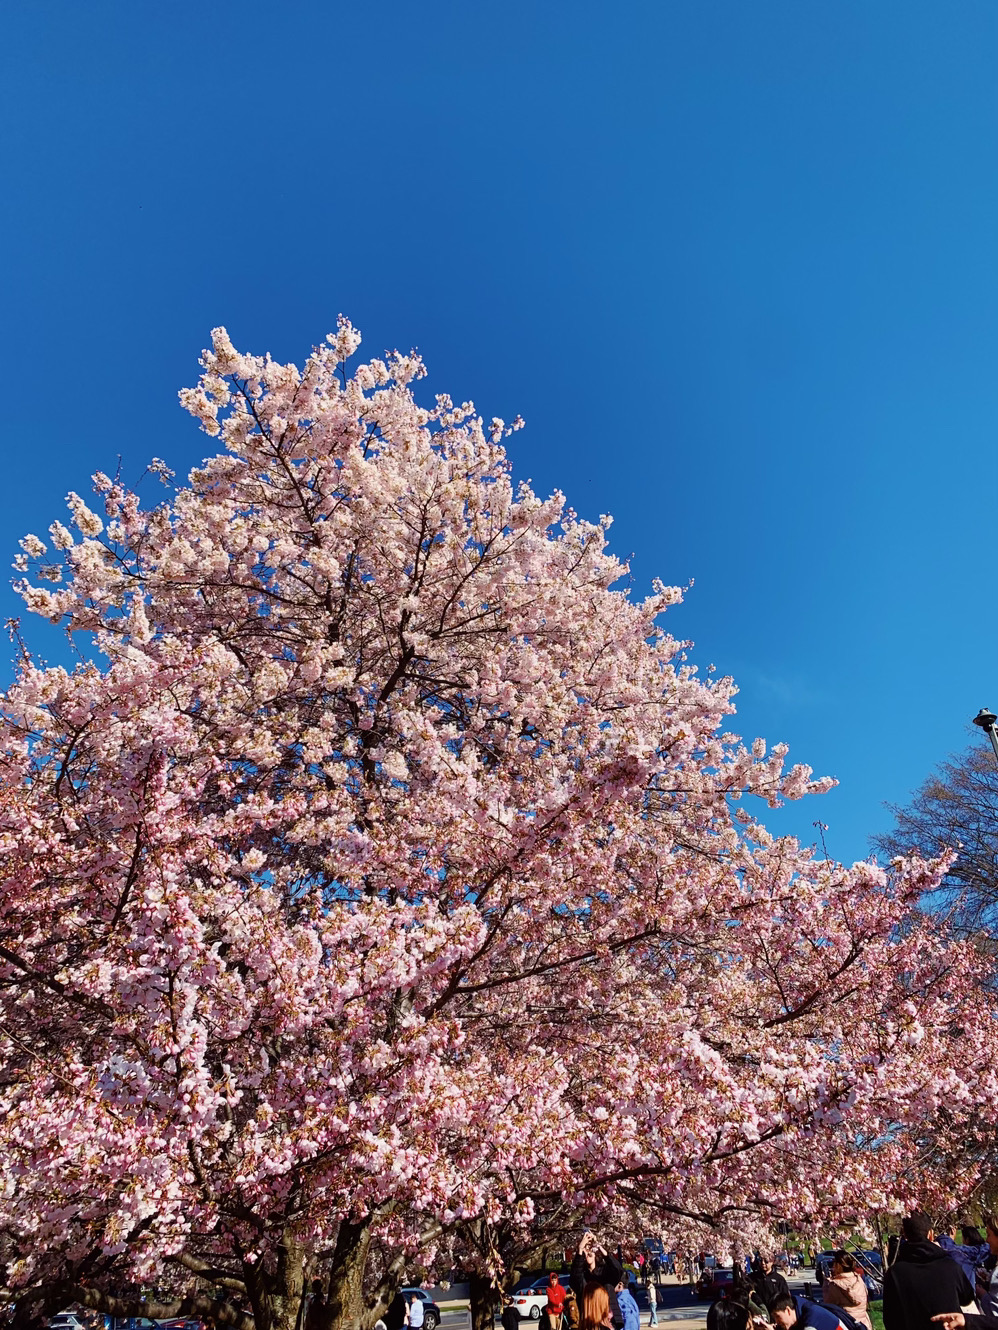 National Cherry Blossom Festival and All Nippon Airways to Plant